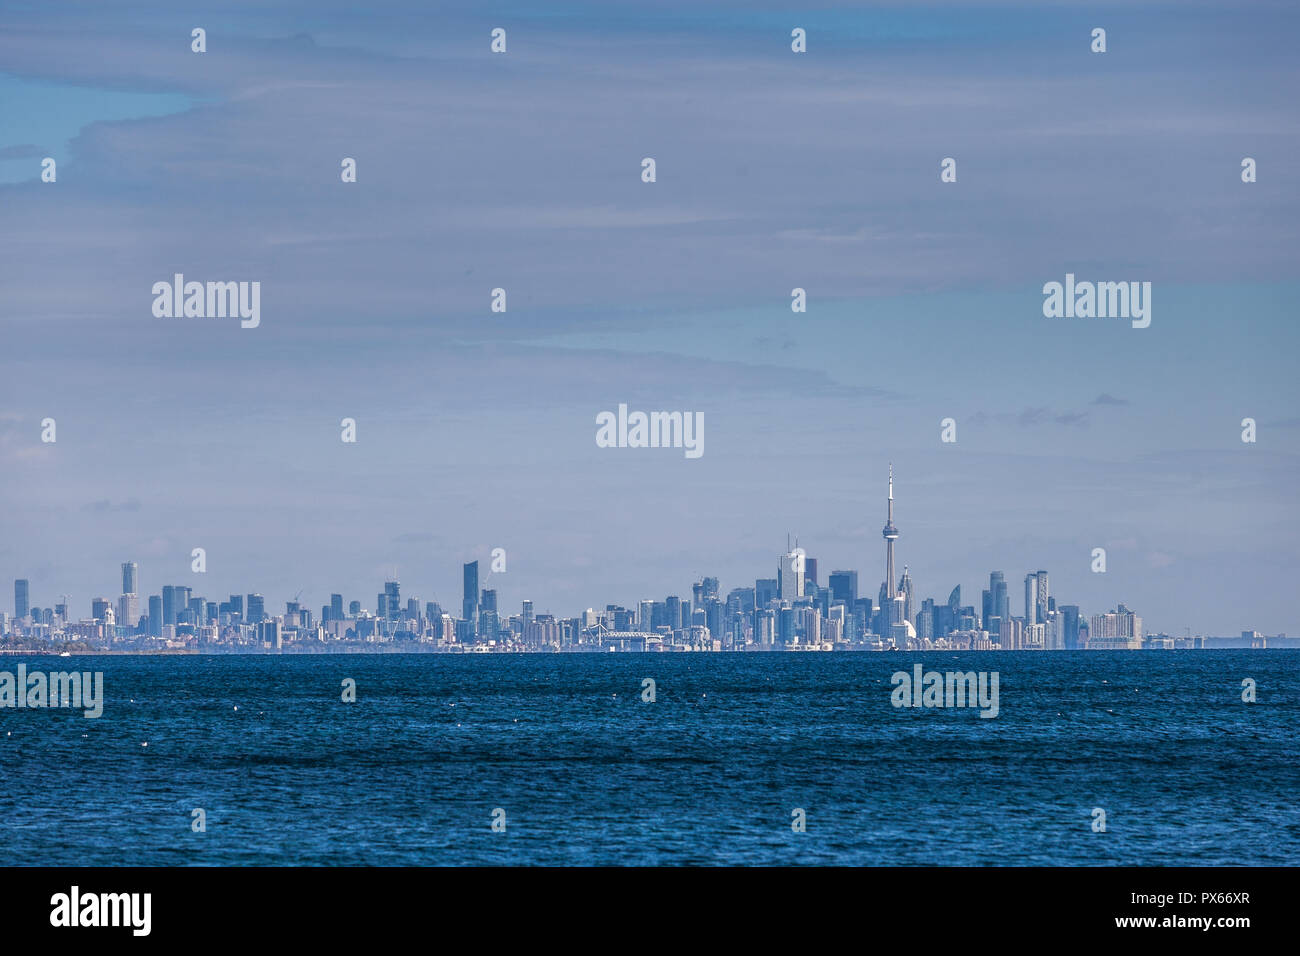 Toronto, CANADA - October 16, 2018: Panoramic view of the city of Toronto across Lake Ontario from the park in Mississauga Stock Photo